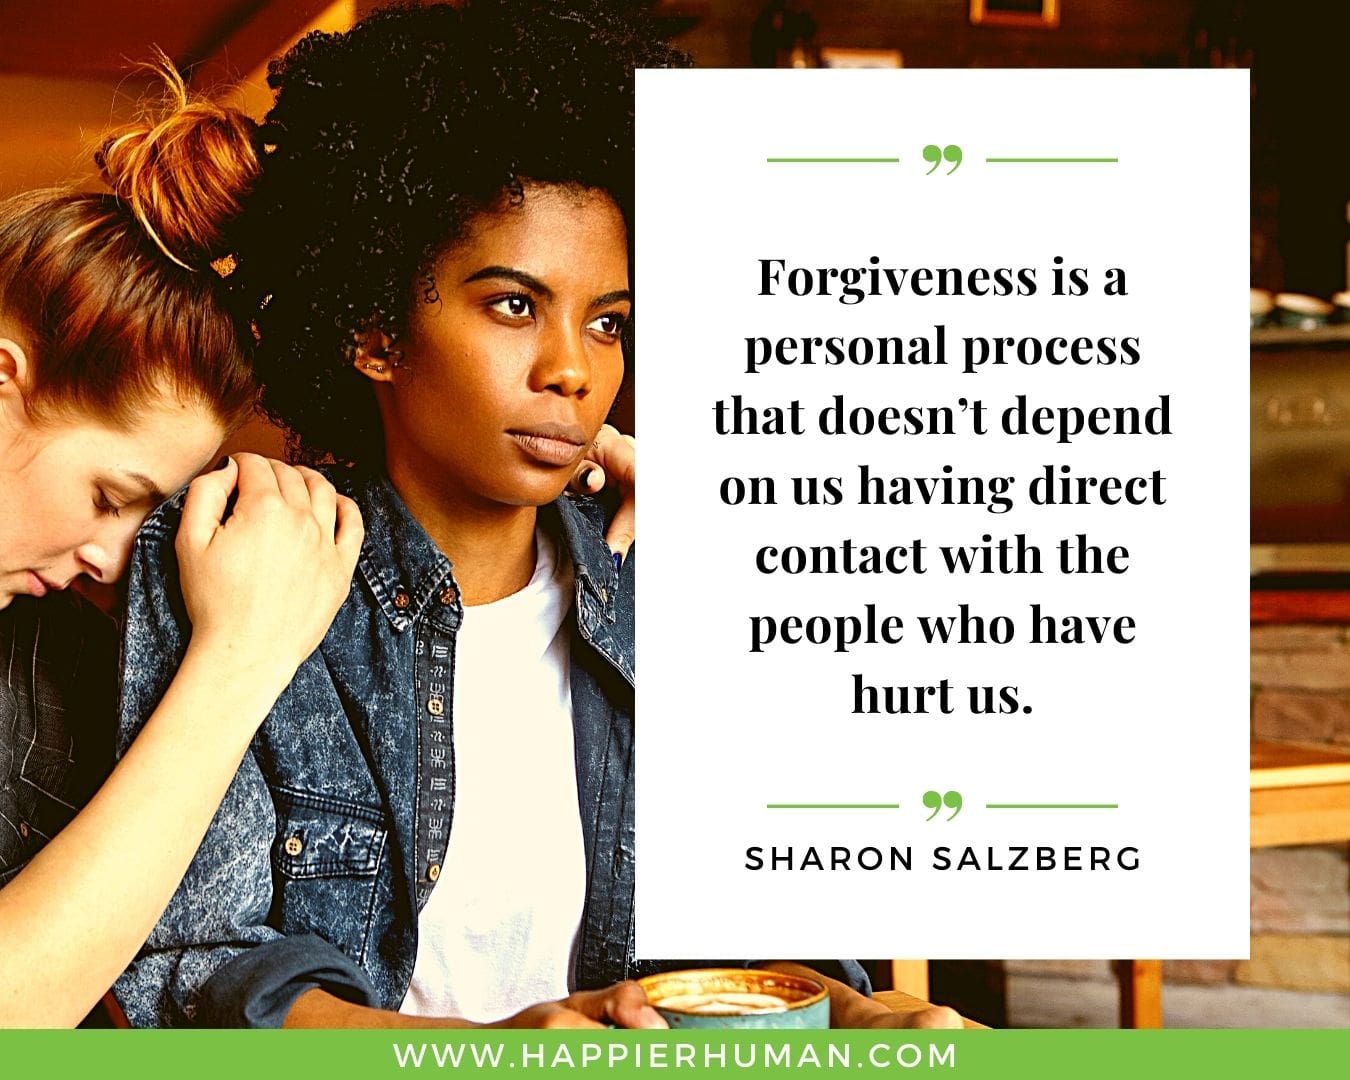 Toxic People Quotes - “Forgiveness is a personal process that doesn’t depend on us having direct contact with the people who have hurt us.” – Sharon Salzberg